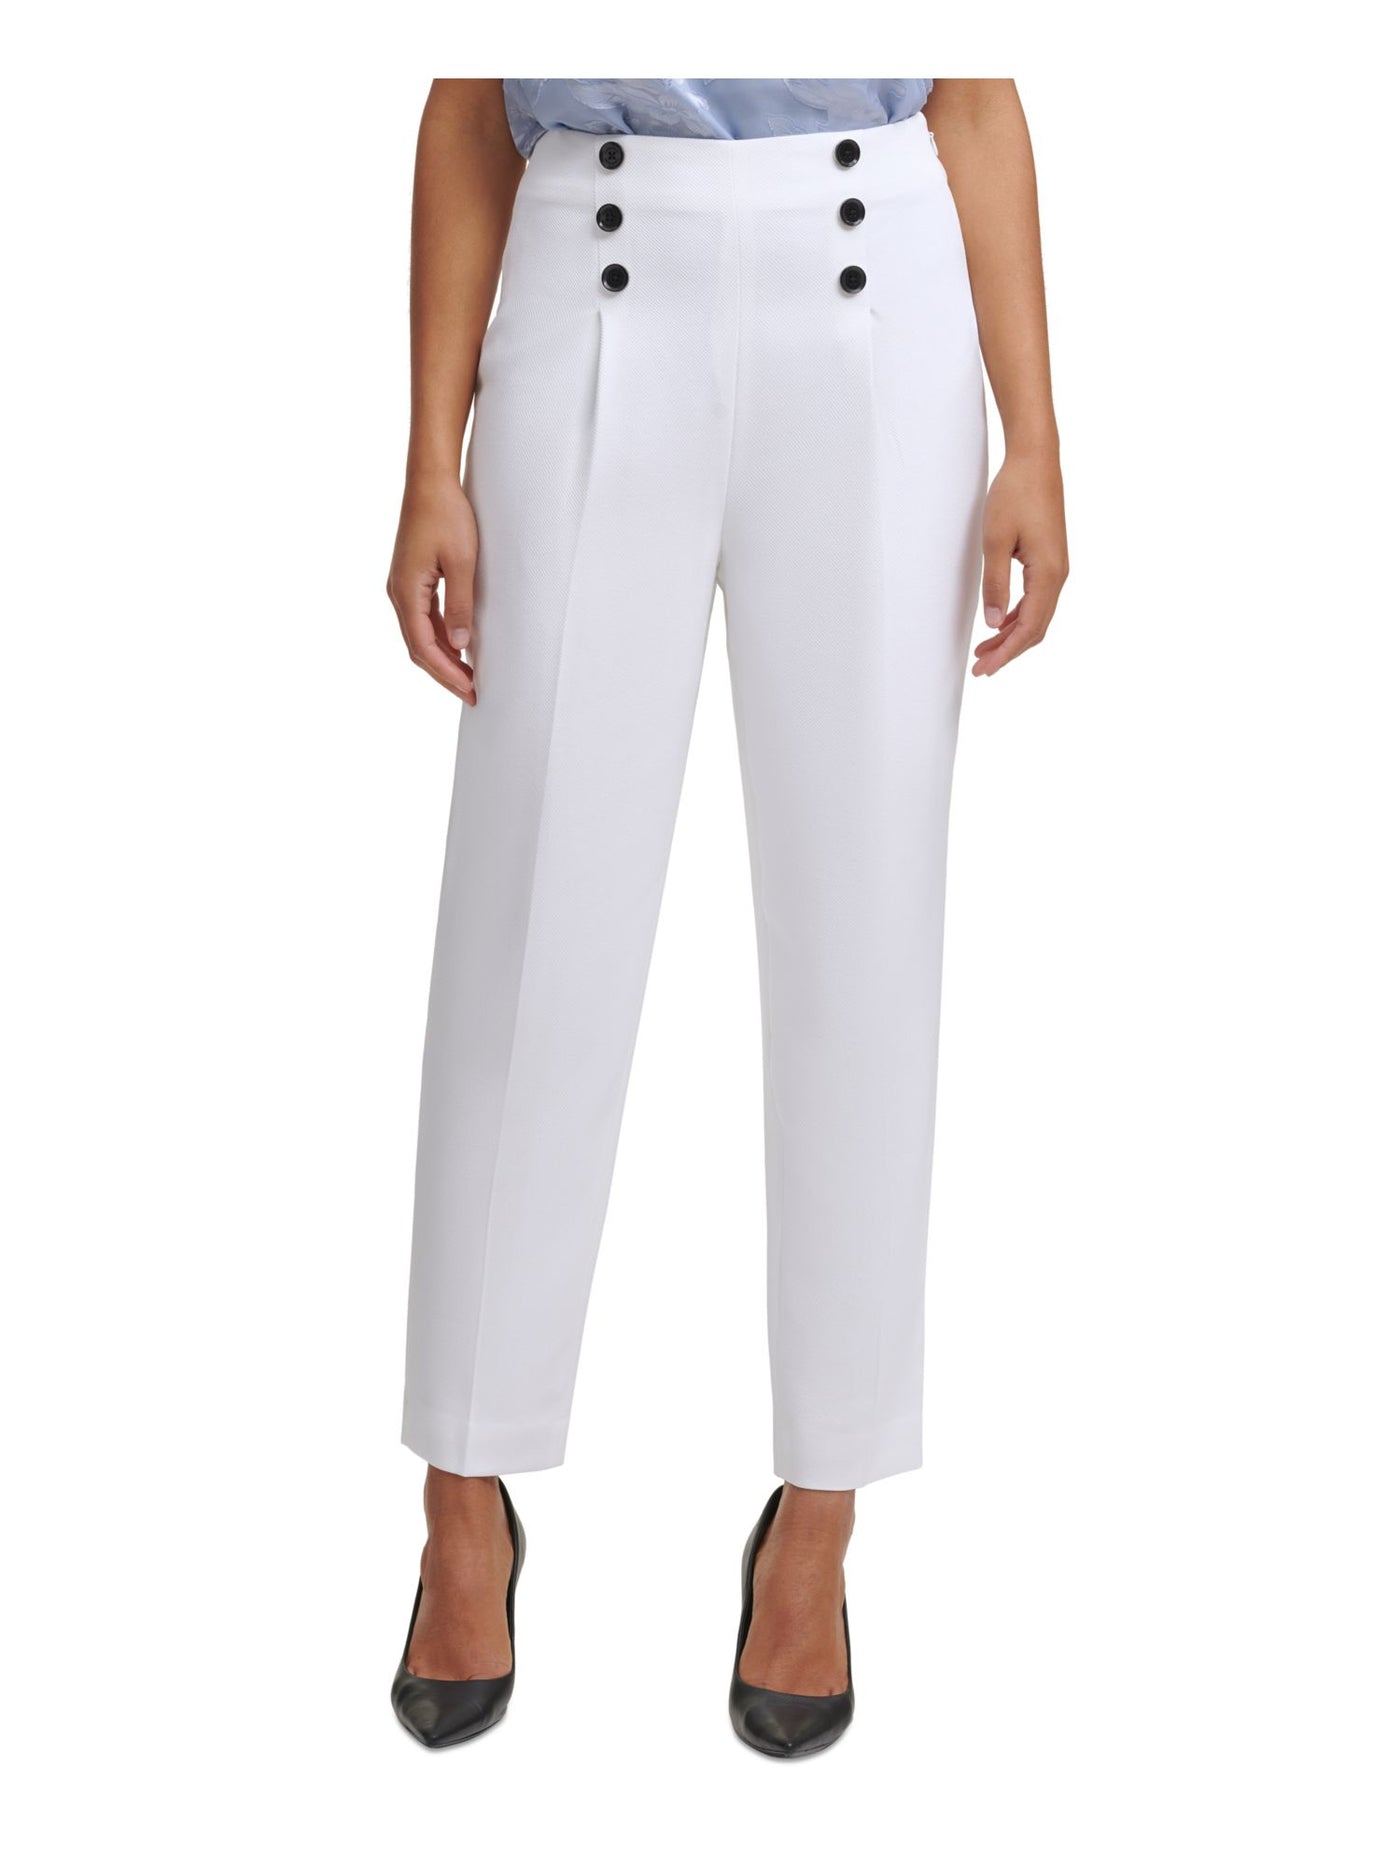 CALVIN KLEIN Womens Ivory Zippered Textured Buttoned, Pleated Wear To Work Straight leg Pants Petites 14P